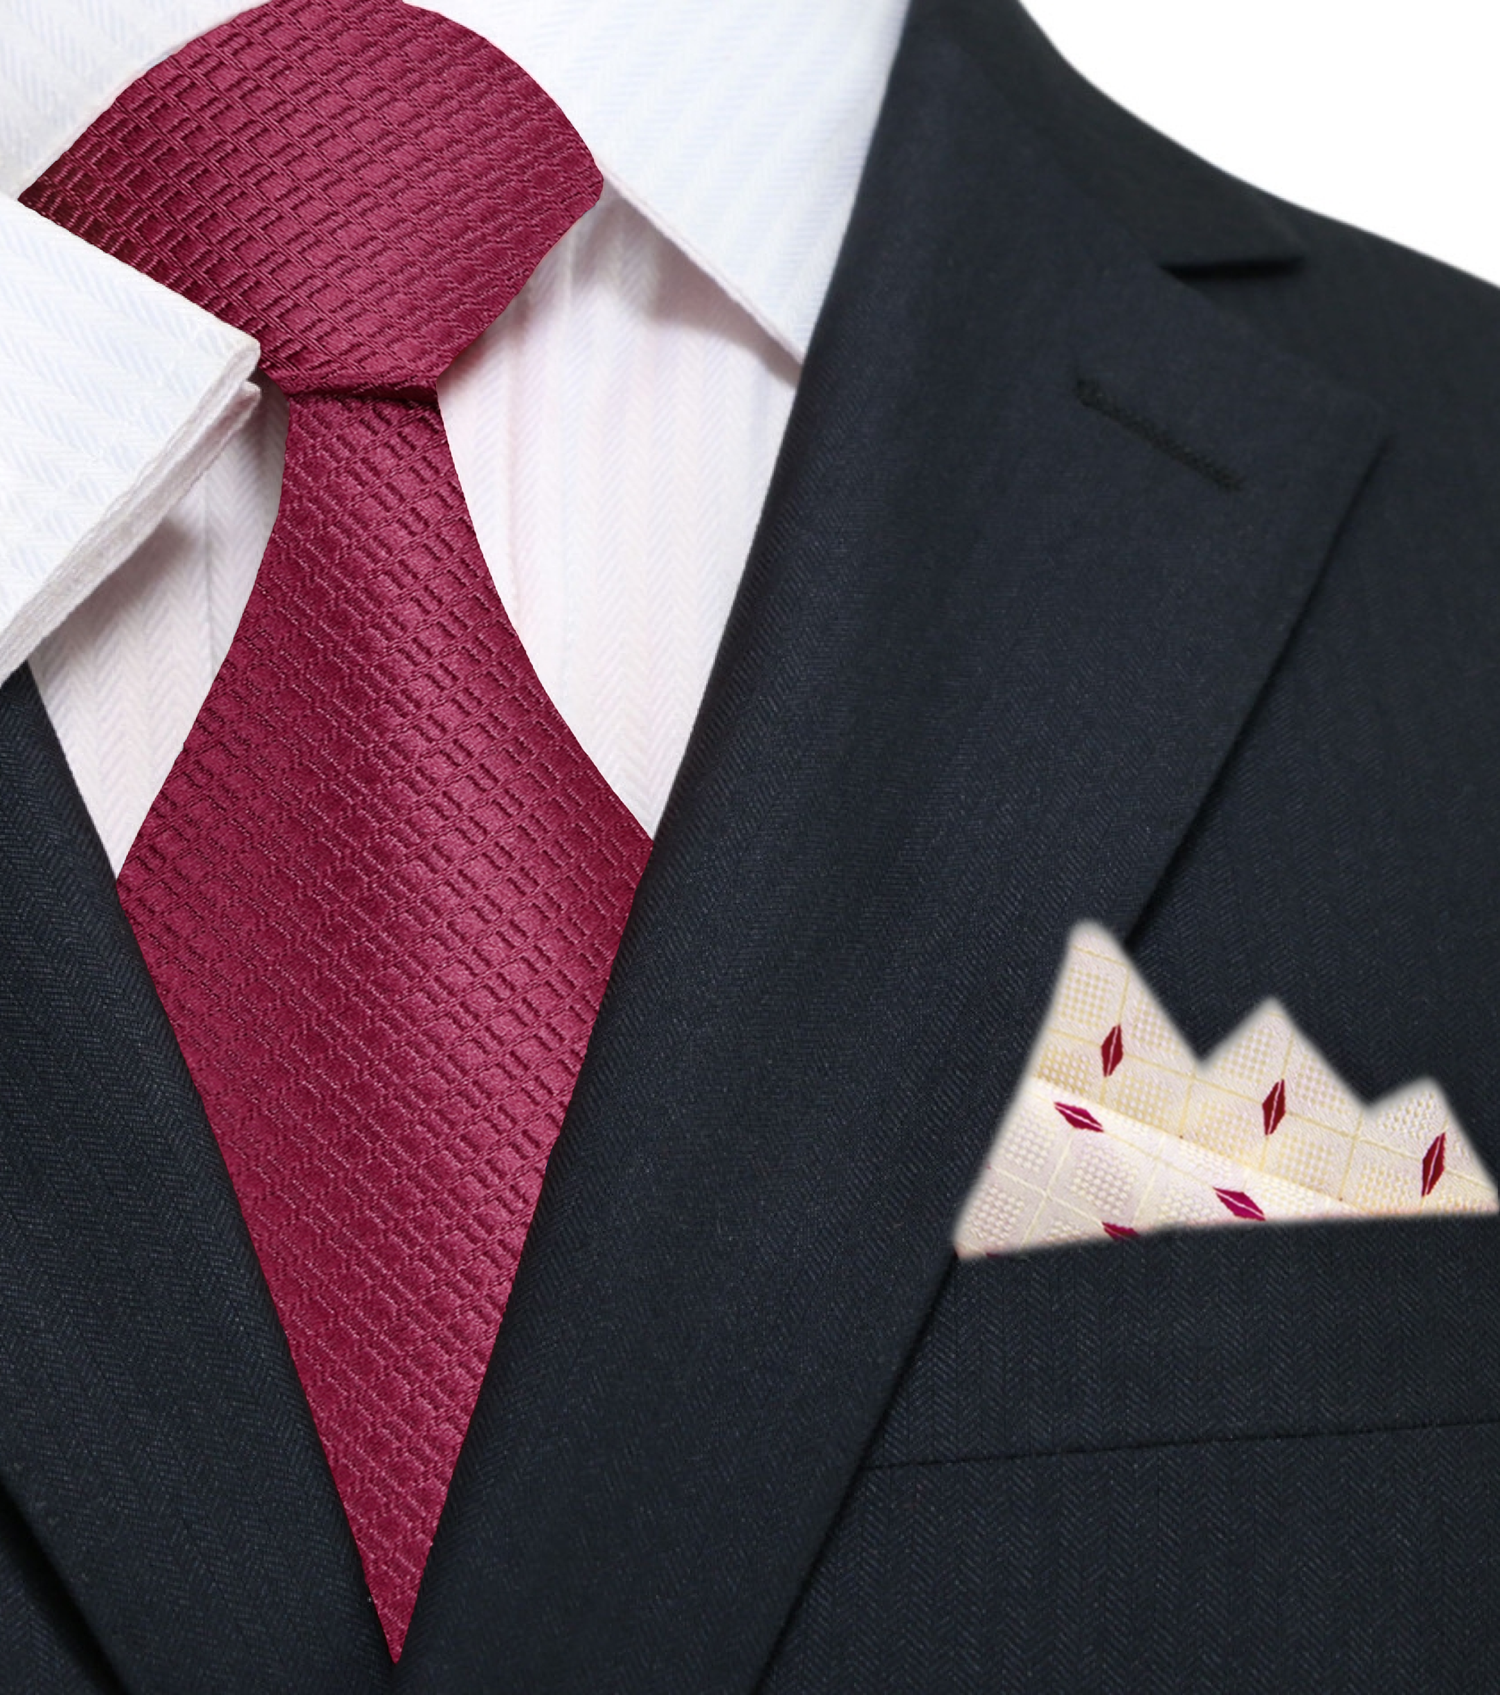 Main: Burgundy Tie with Accenting Square